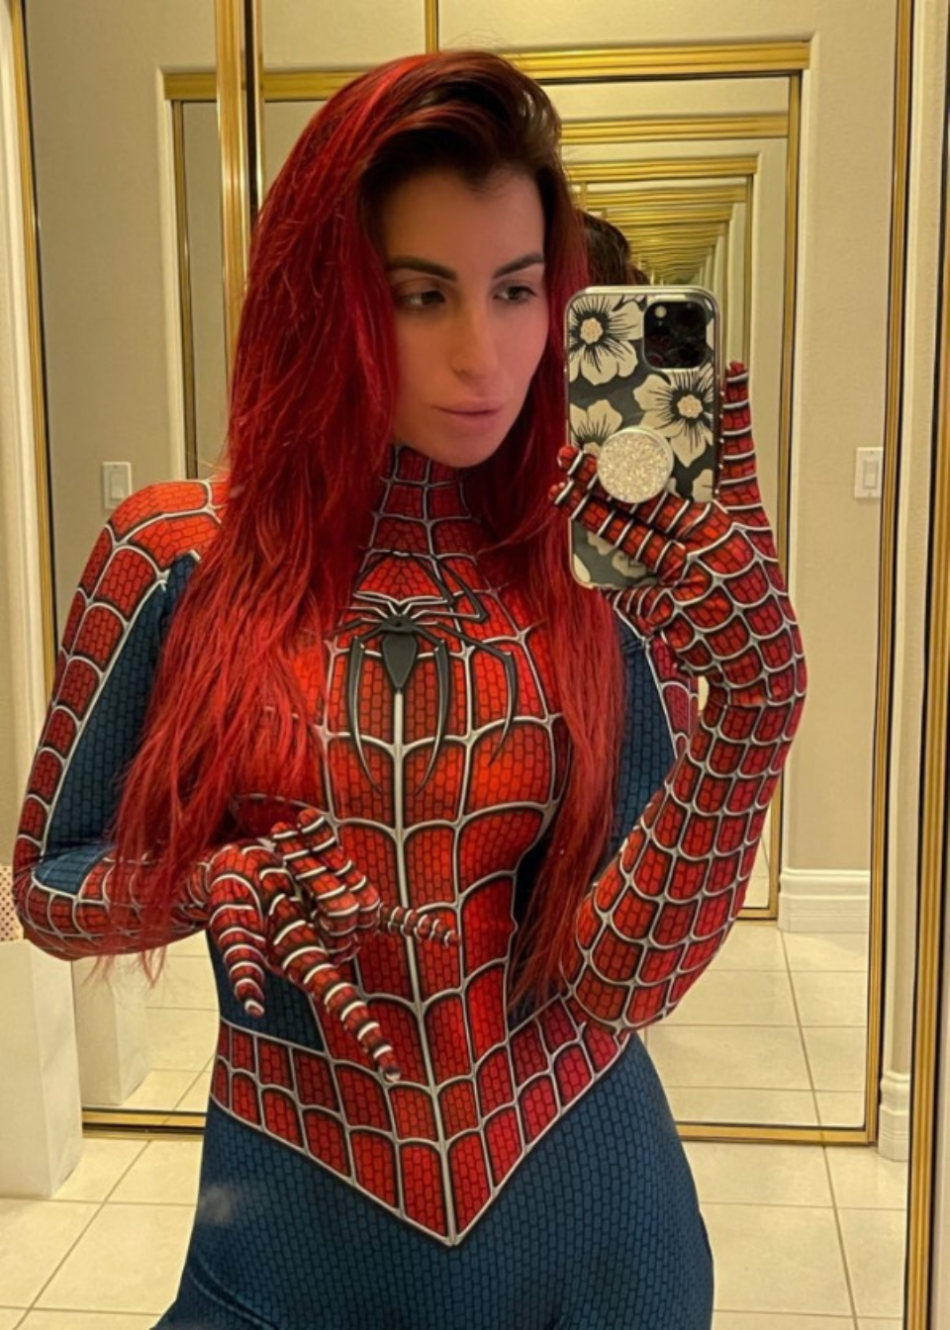 Sexy Red Hot Cosplay Girls Spiderman Women Best Photo Compilation 2021 (89 HQ Photos) 212